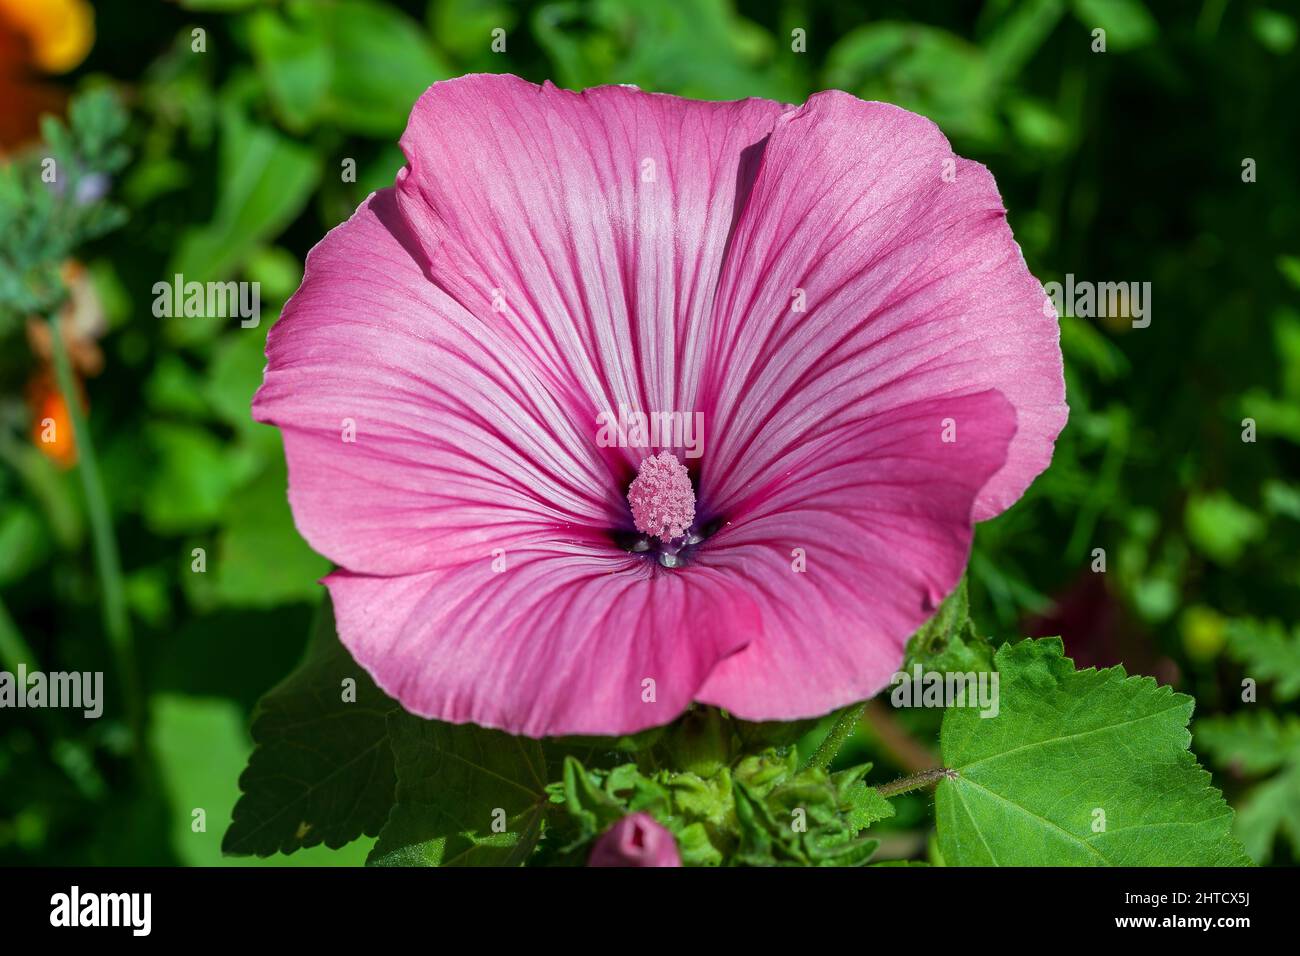 Lavatera trimestris a summer autumn fall flowering plant with a pink summertime flower commonly known as malva tree mallow, stock photo image Stock Photo